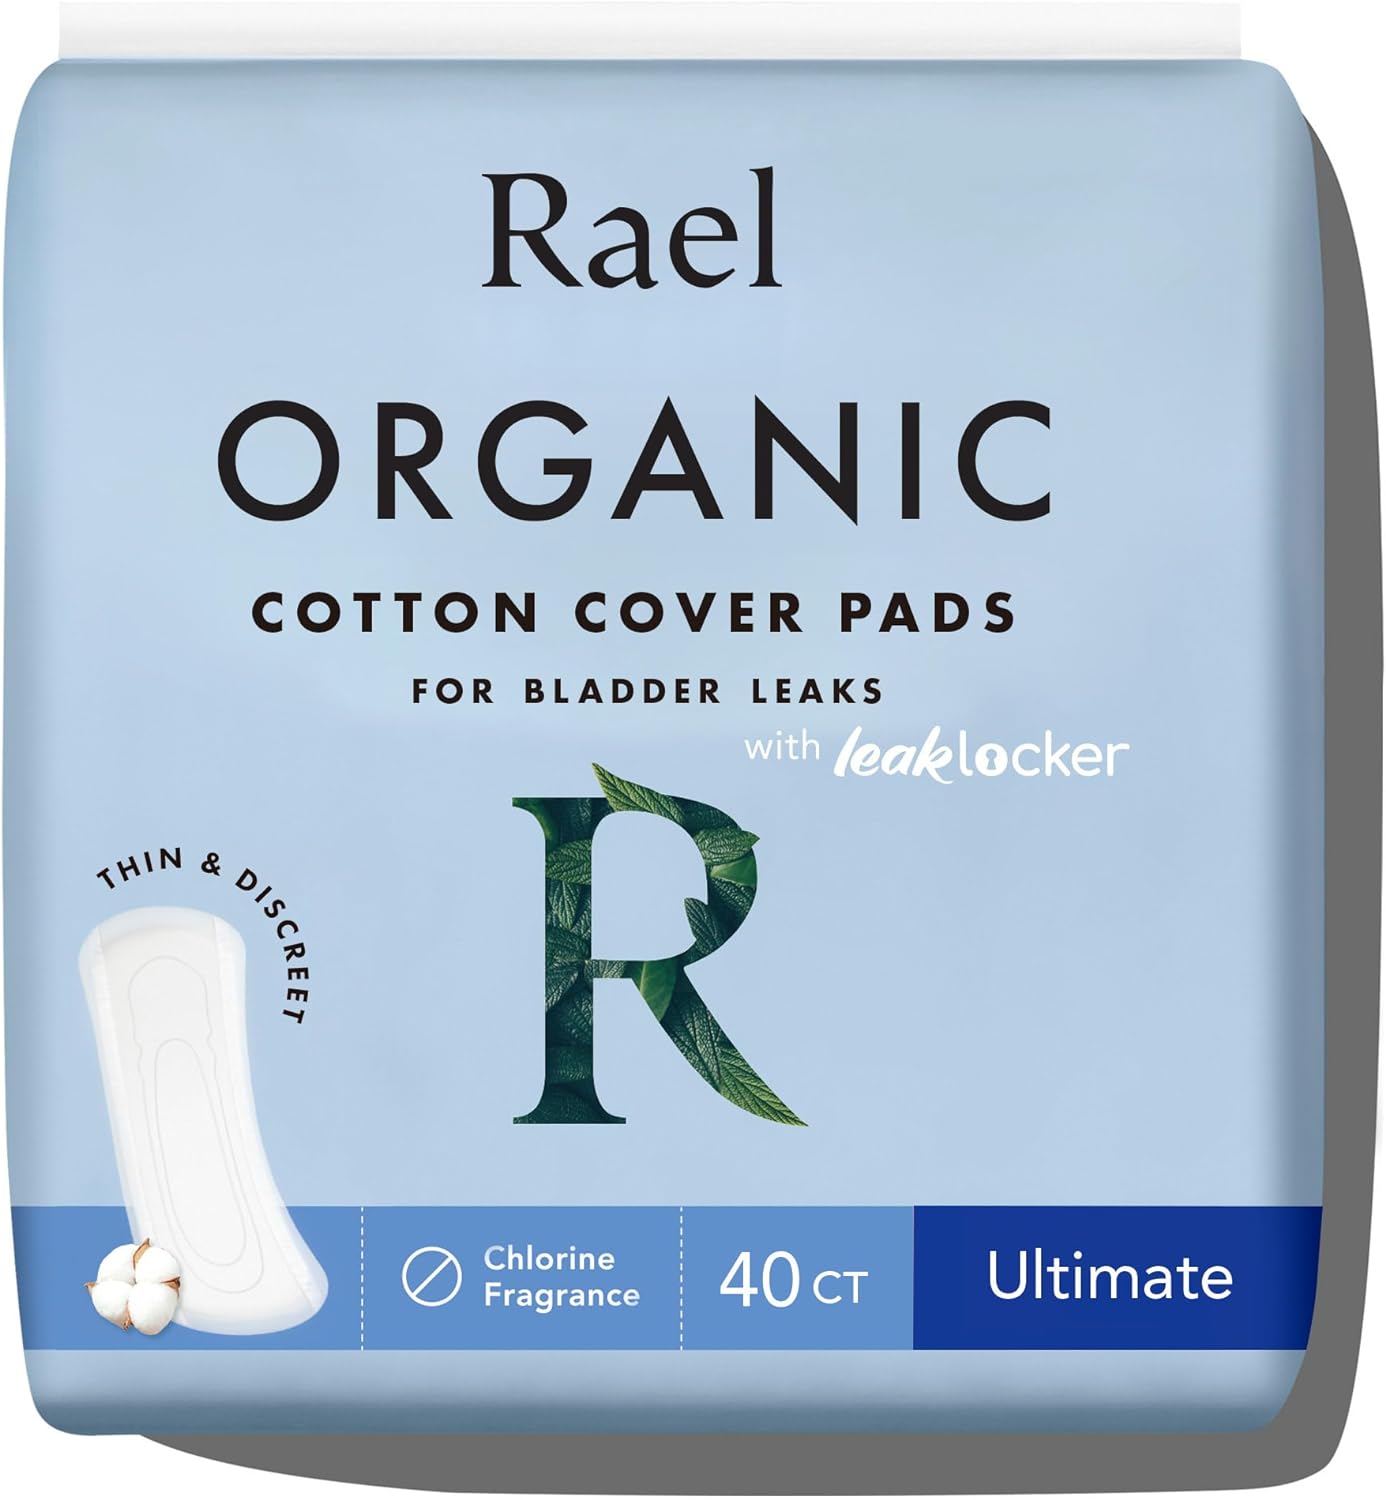 Rael Incontinence Pads for Women, Organic Cotton Cover - Postpartum Essential, Heavy Absorbency, Bladder Leak Control, 4 Layer Core with Leak Guard Technology, Long Length (Ultimate, 40 Count)